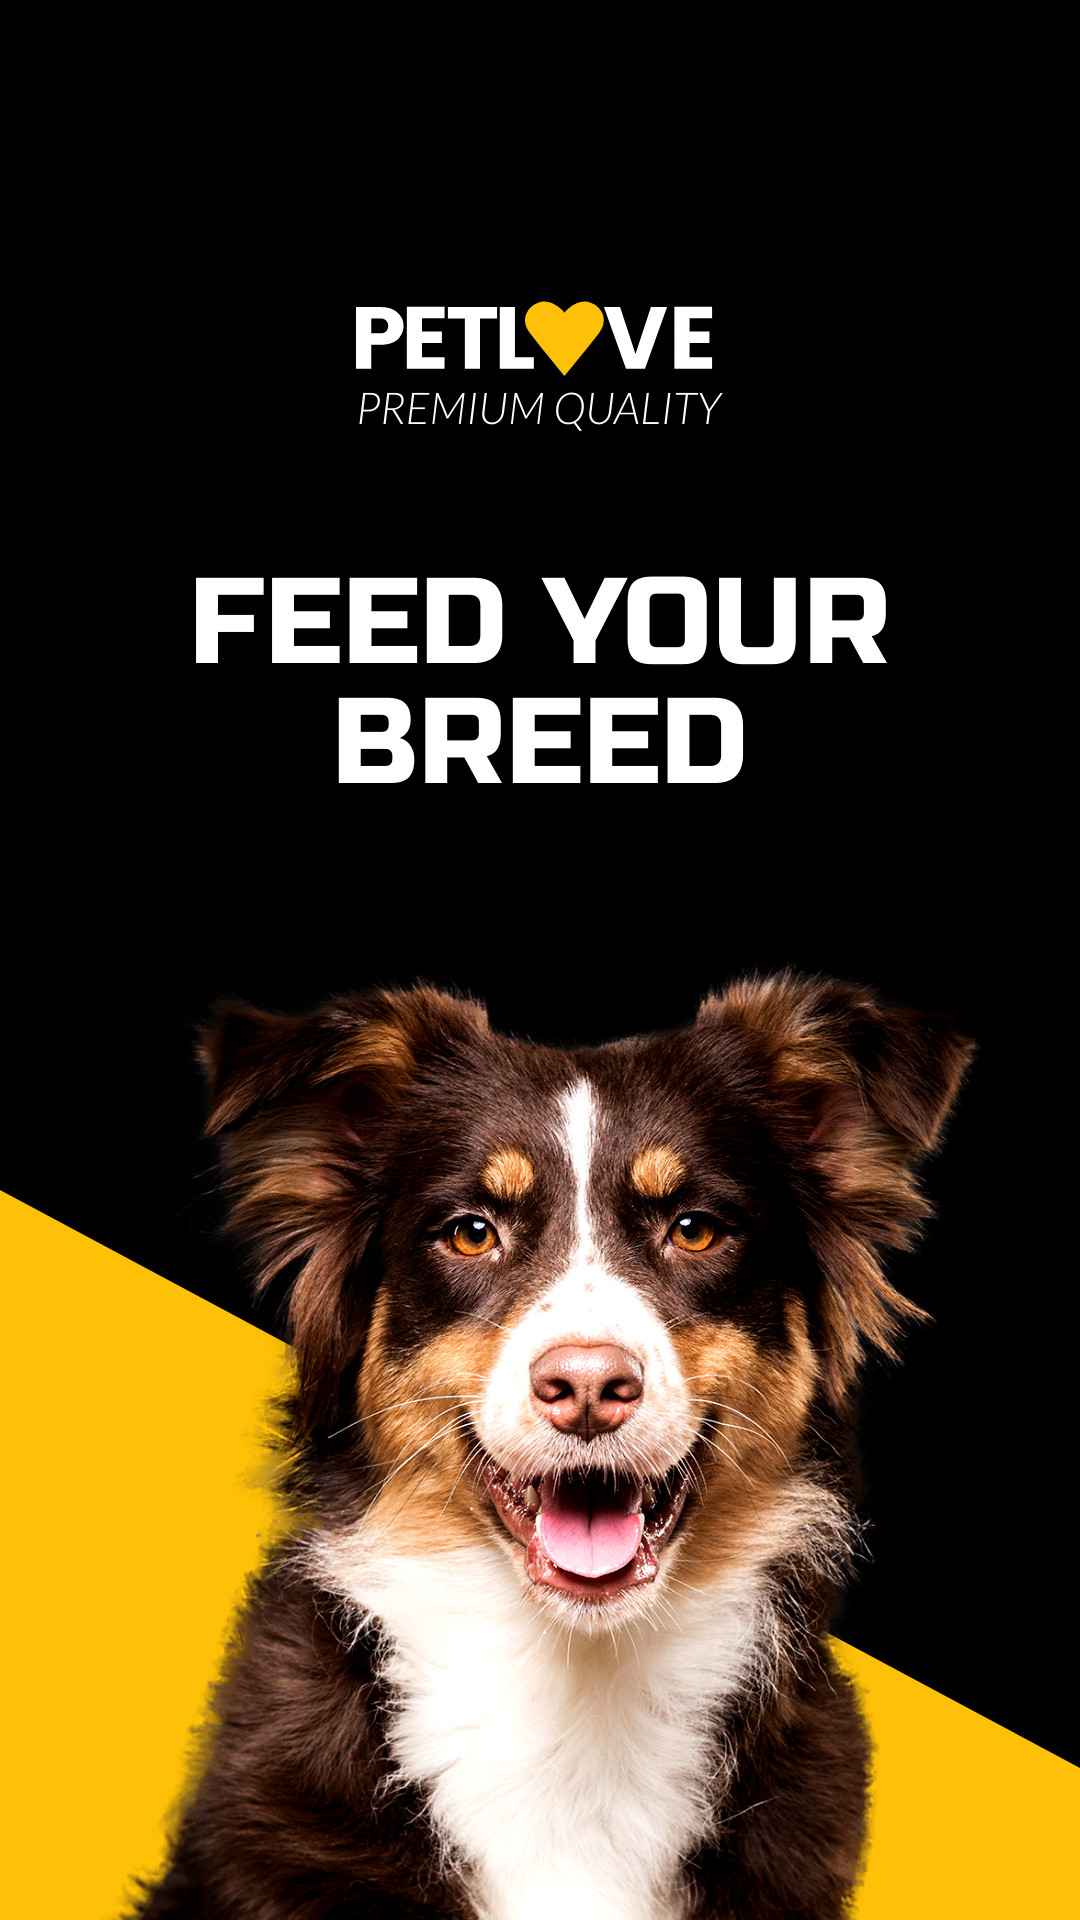 Feed Your Breed Pet Love Inline Rectangle 300x250